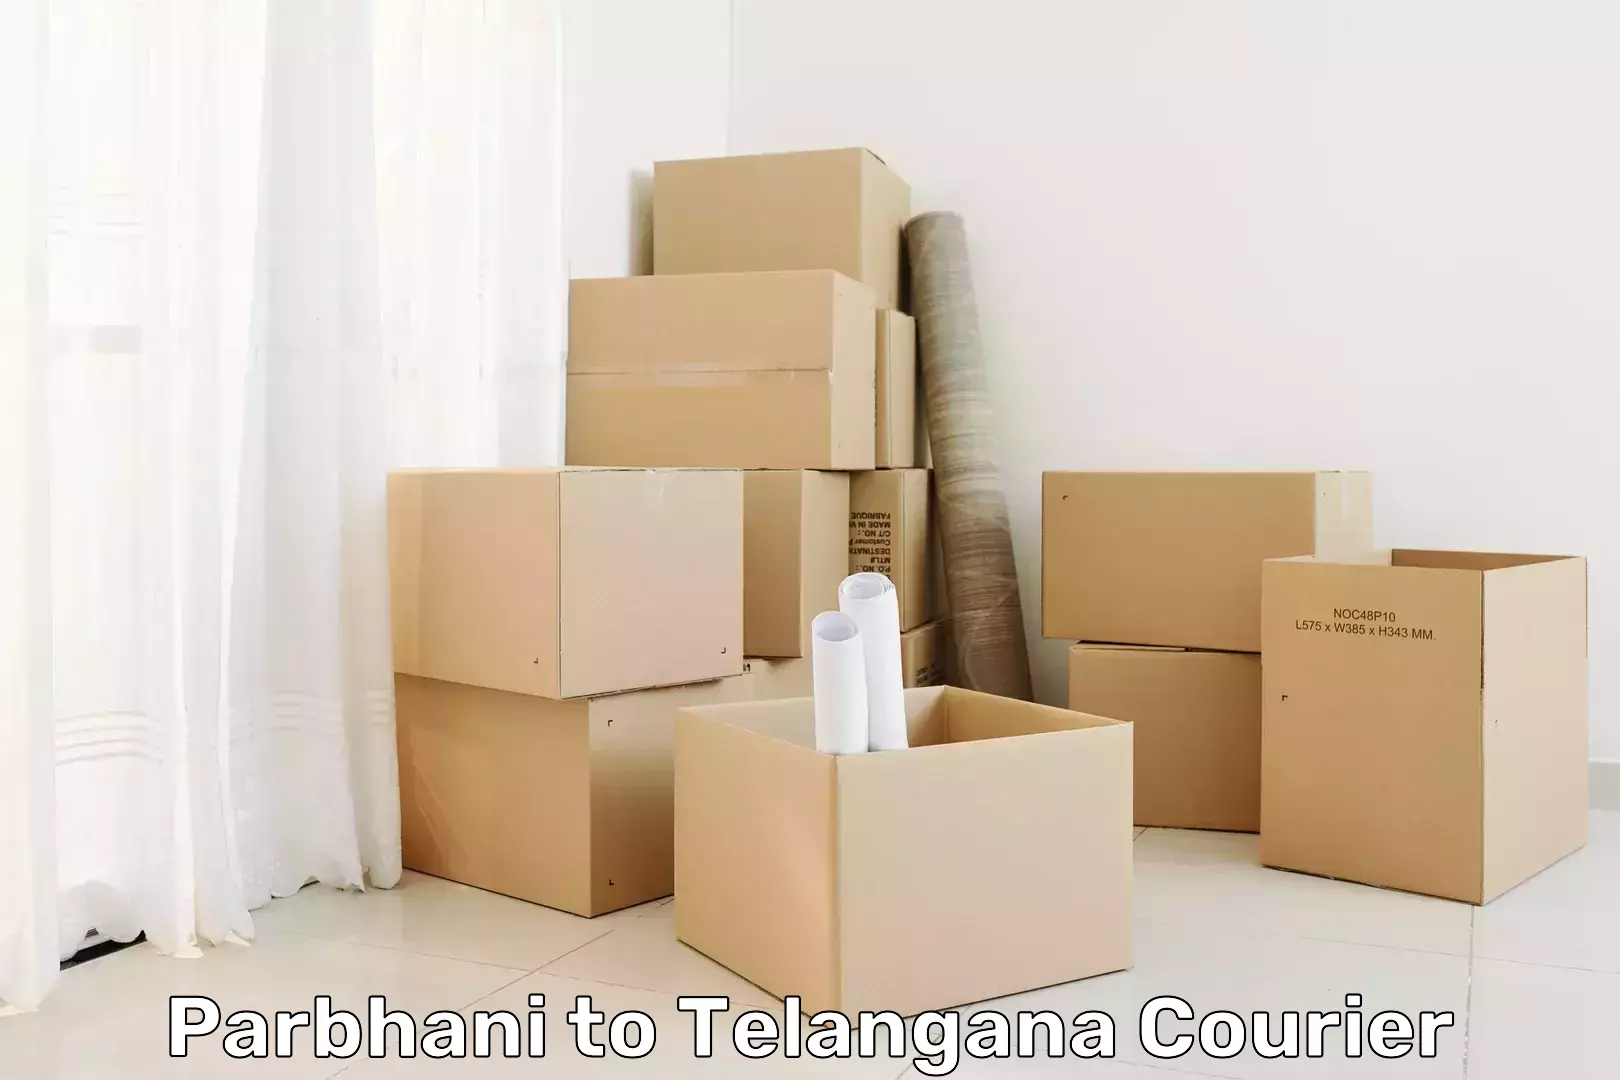 State-of-the-art courier technology Parbhani to Jannaram